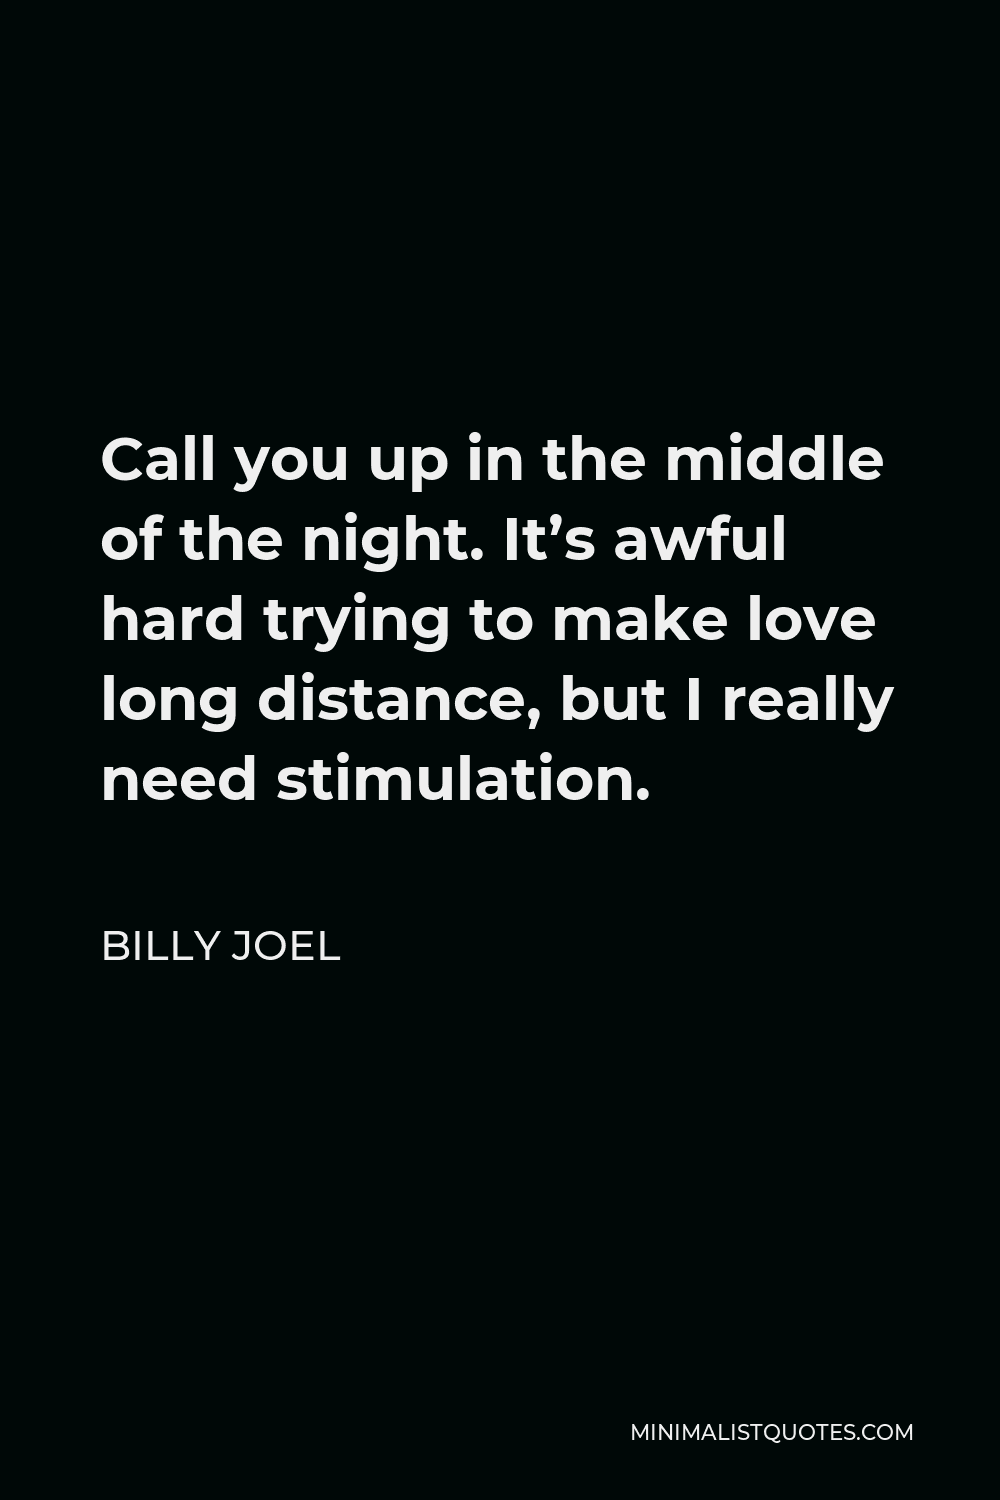 Billy Joel Quote - Call you up in the middle of the night. It’s awful hard trying to make love long distance, but I really need stimulation.